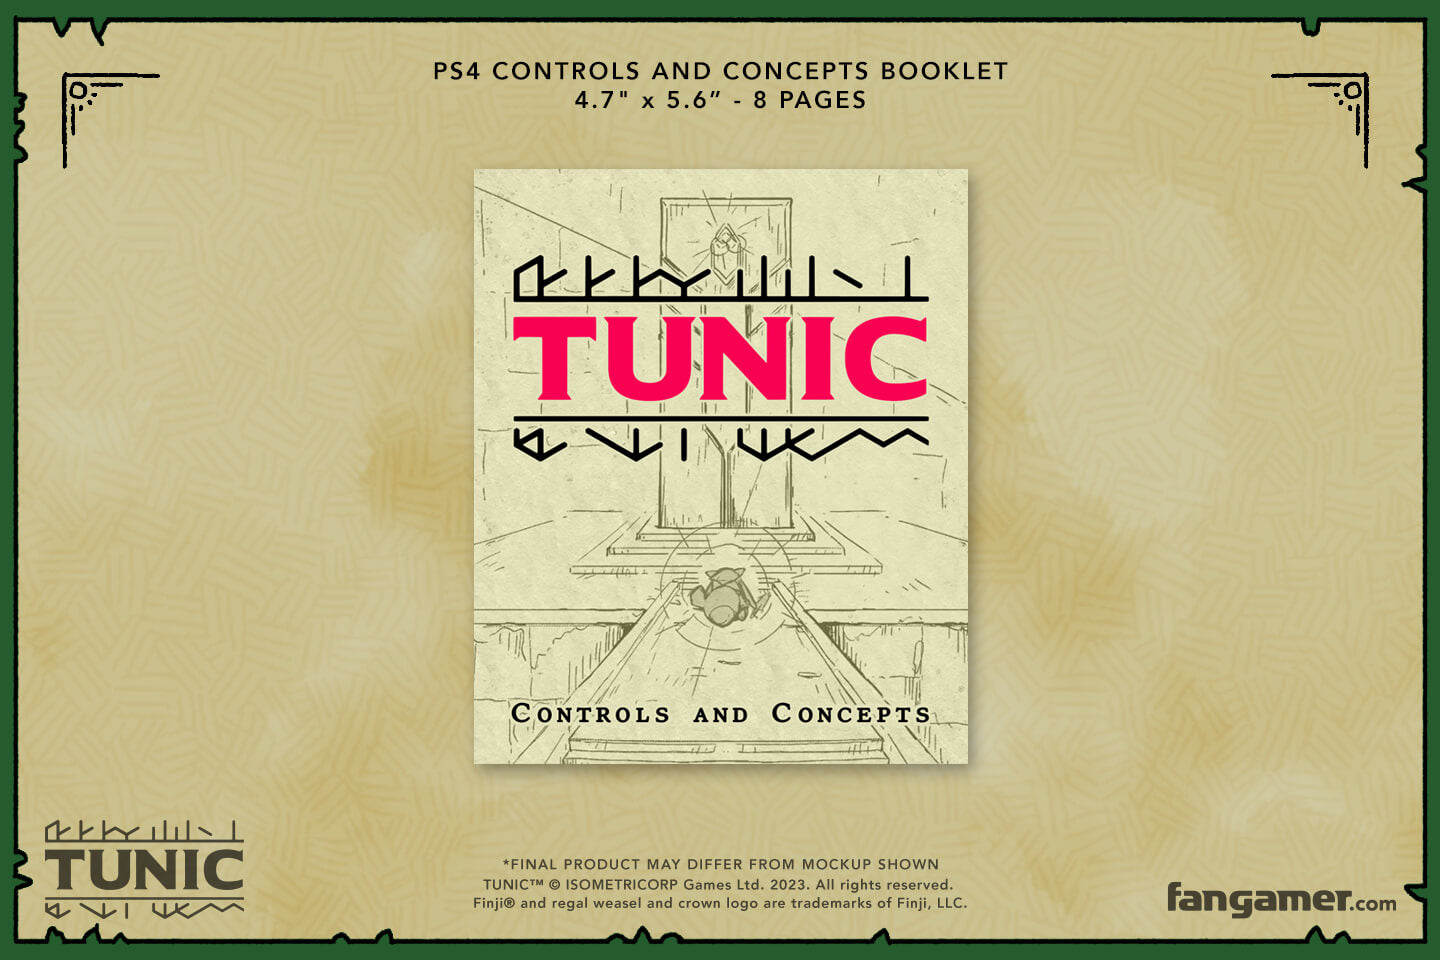  Tunic Deluxe Edition : Video Games